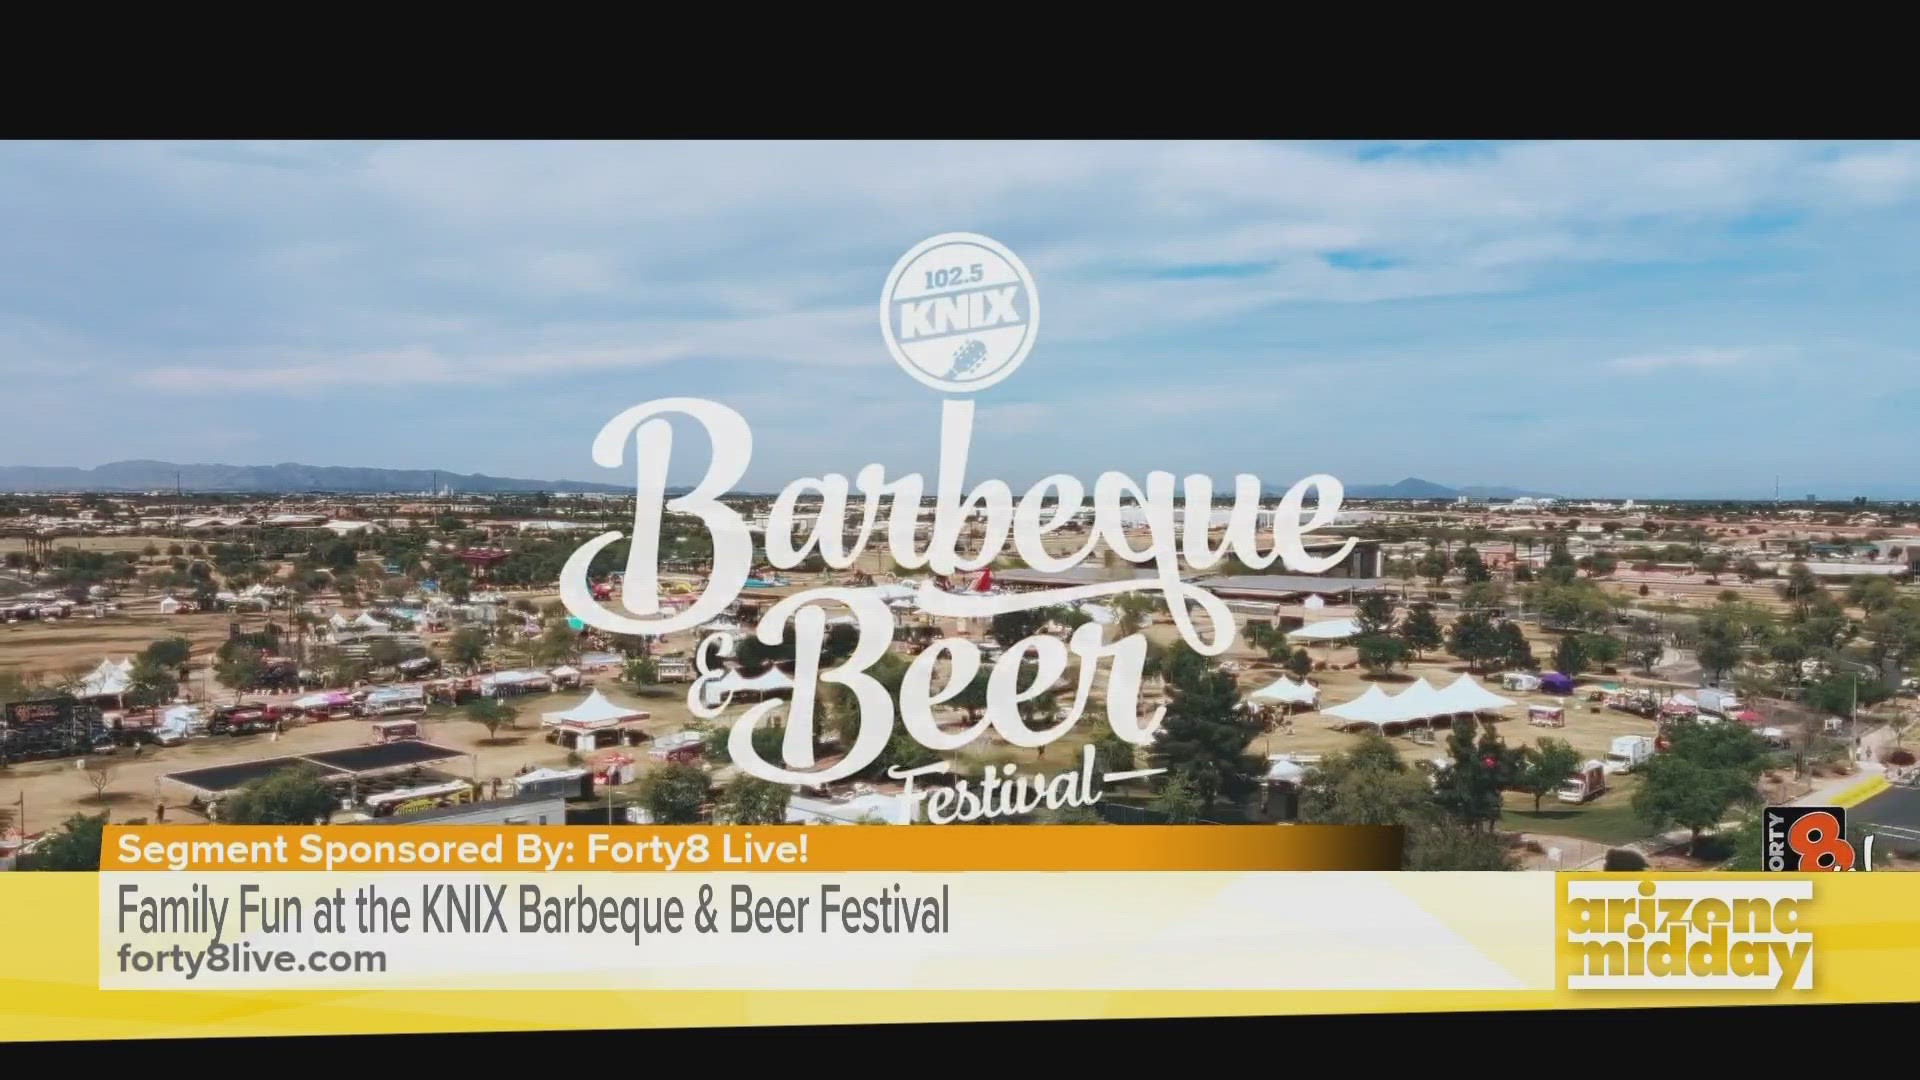 The KNIX BBQ & Beer Festival is in Chandler this weekend!